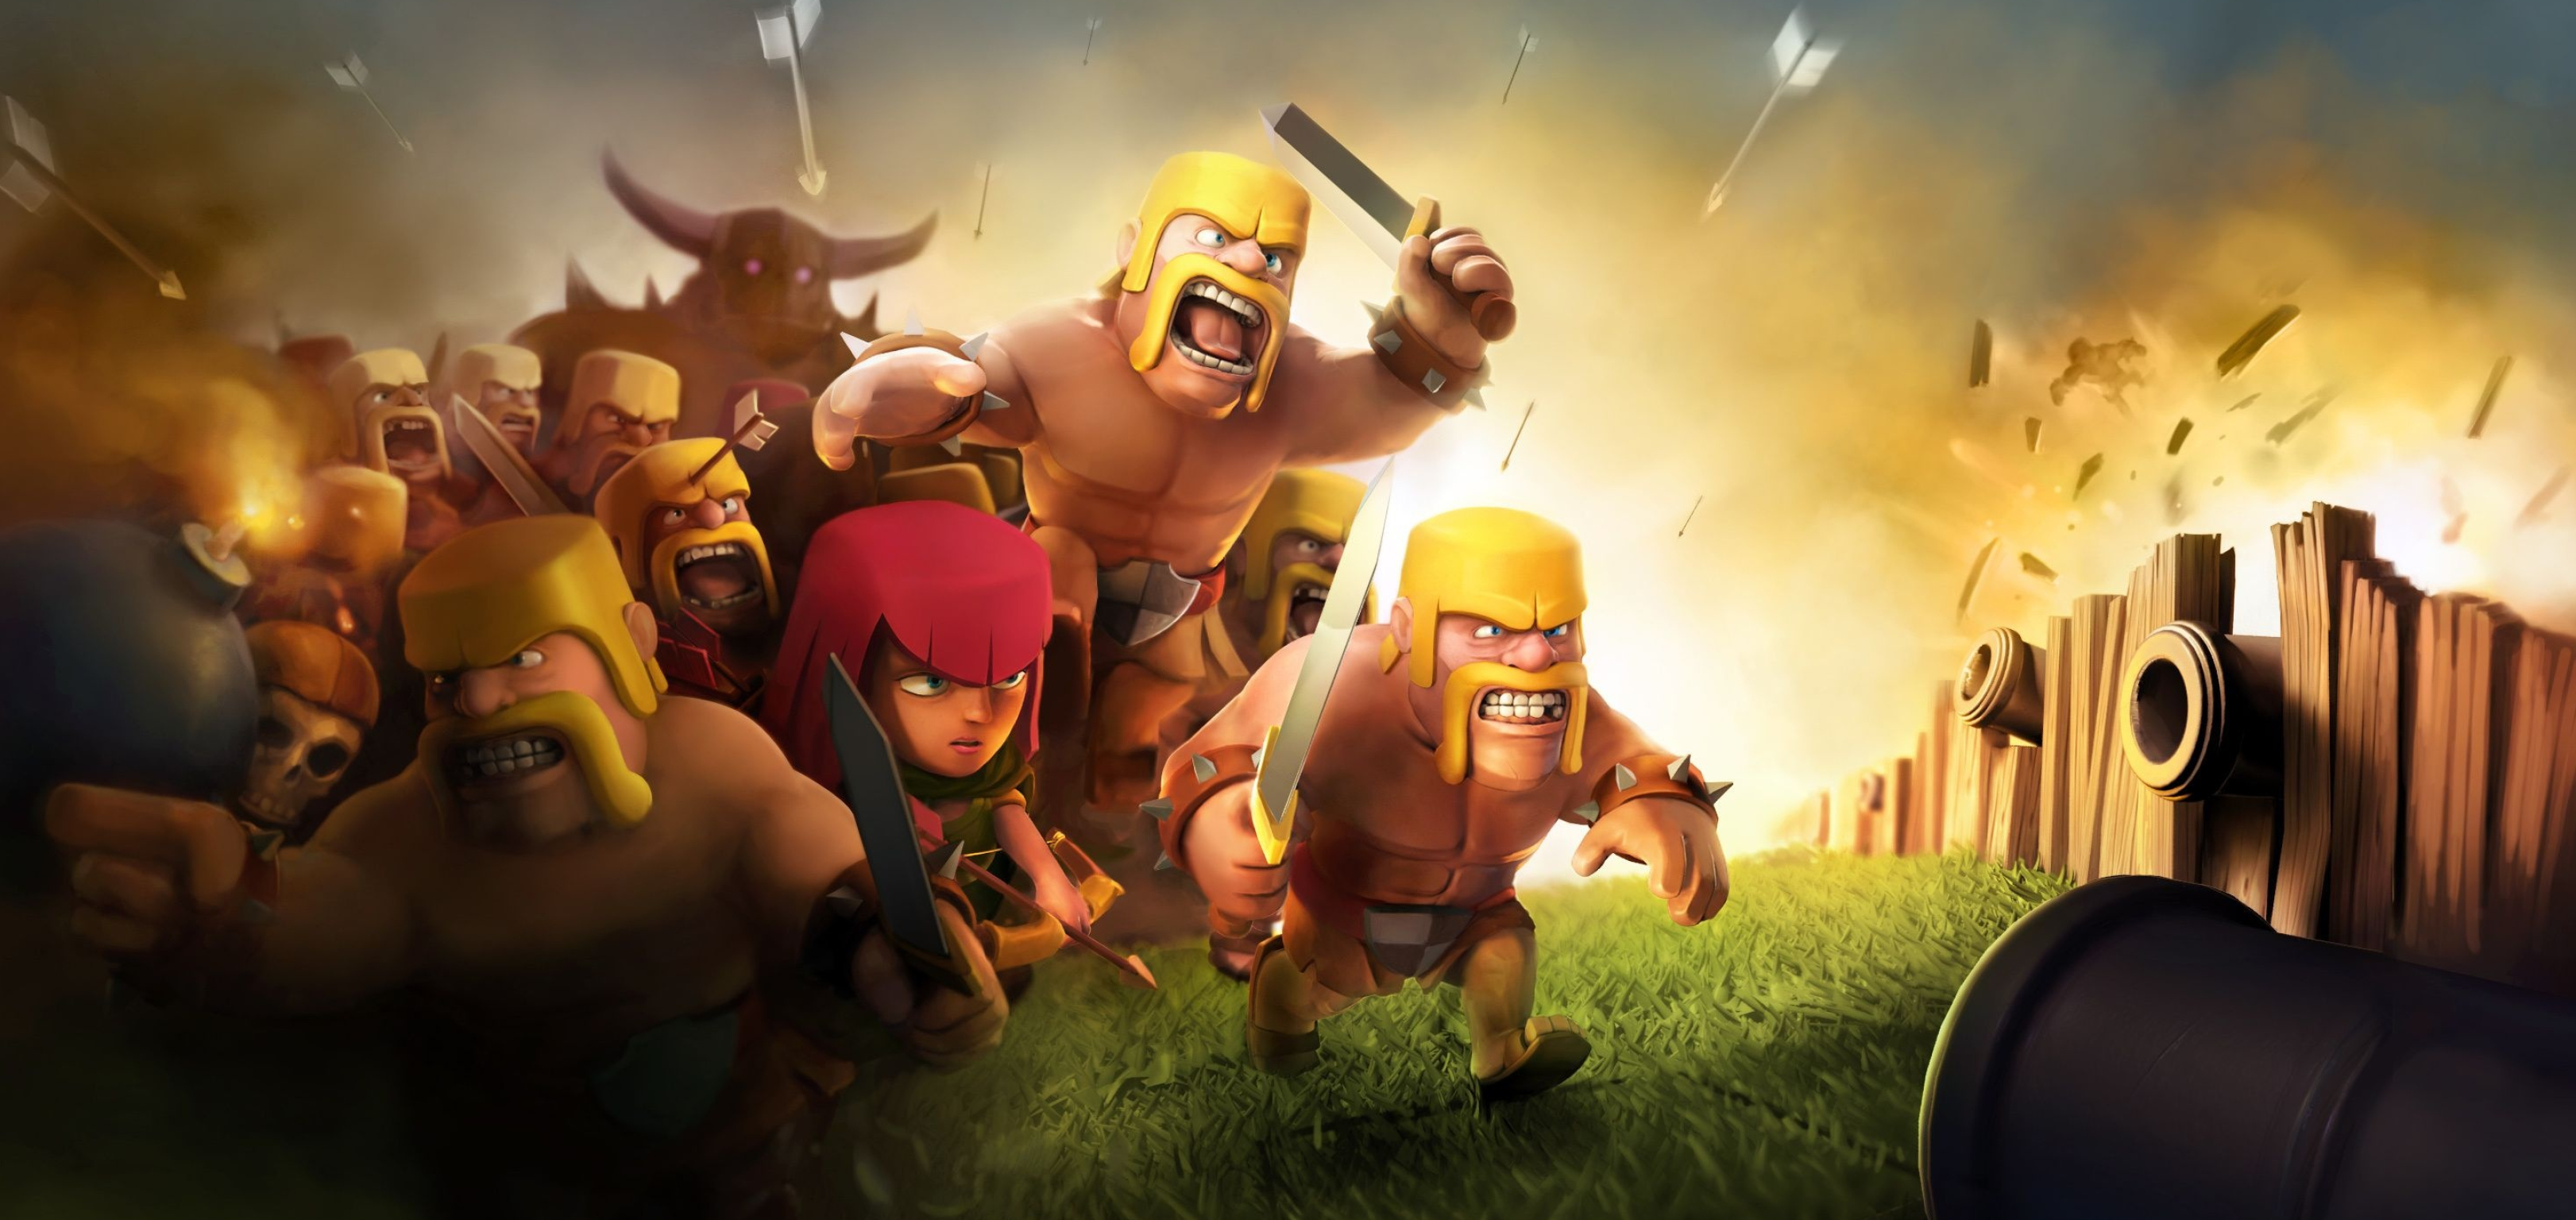 Clash of Clans: Players build their own village using the resources gained from attacking other player's villages with troops. 3250x1540 Dual Screen Background.